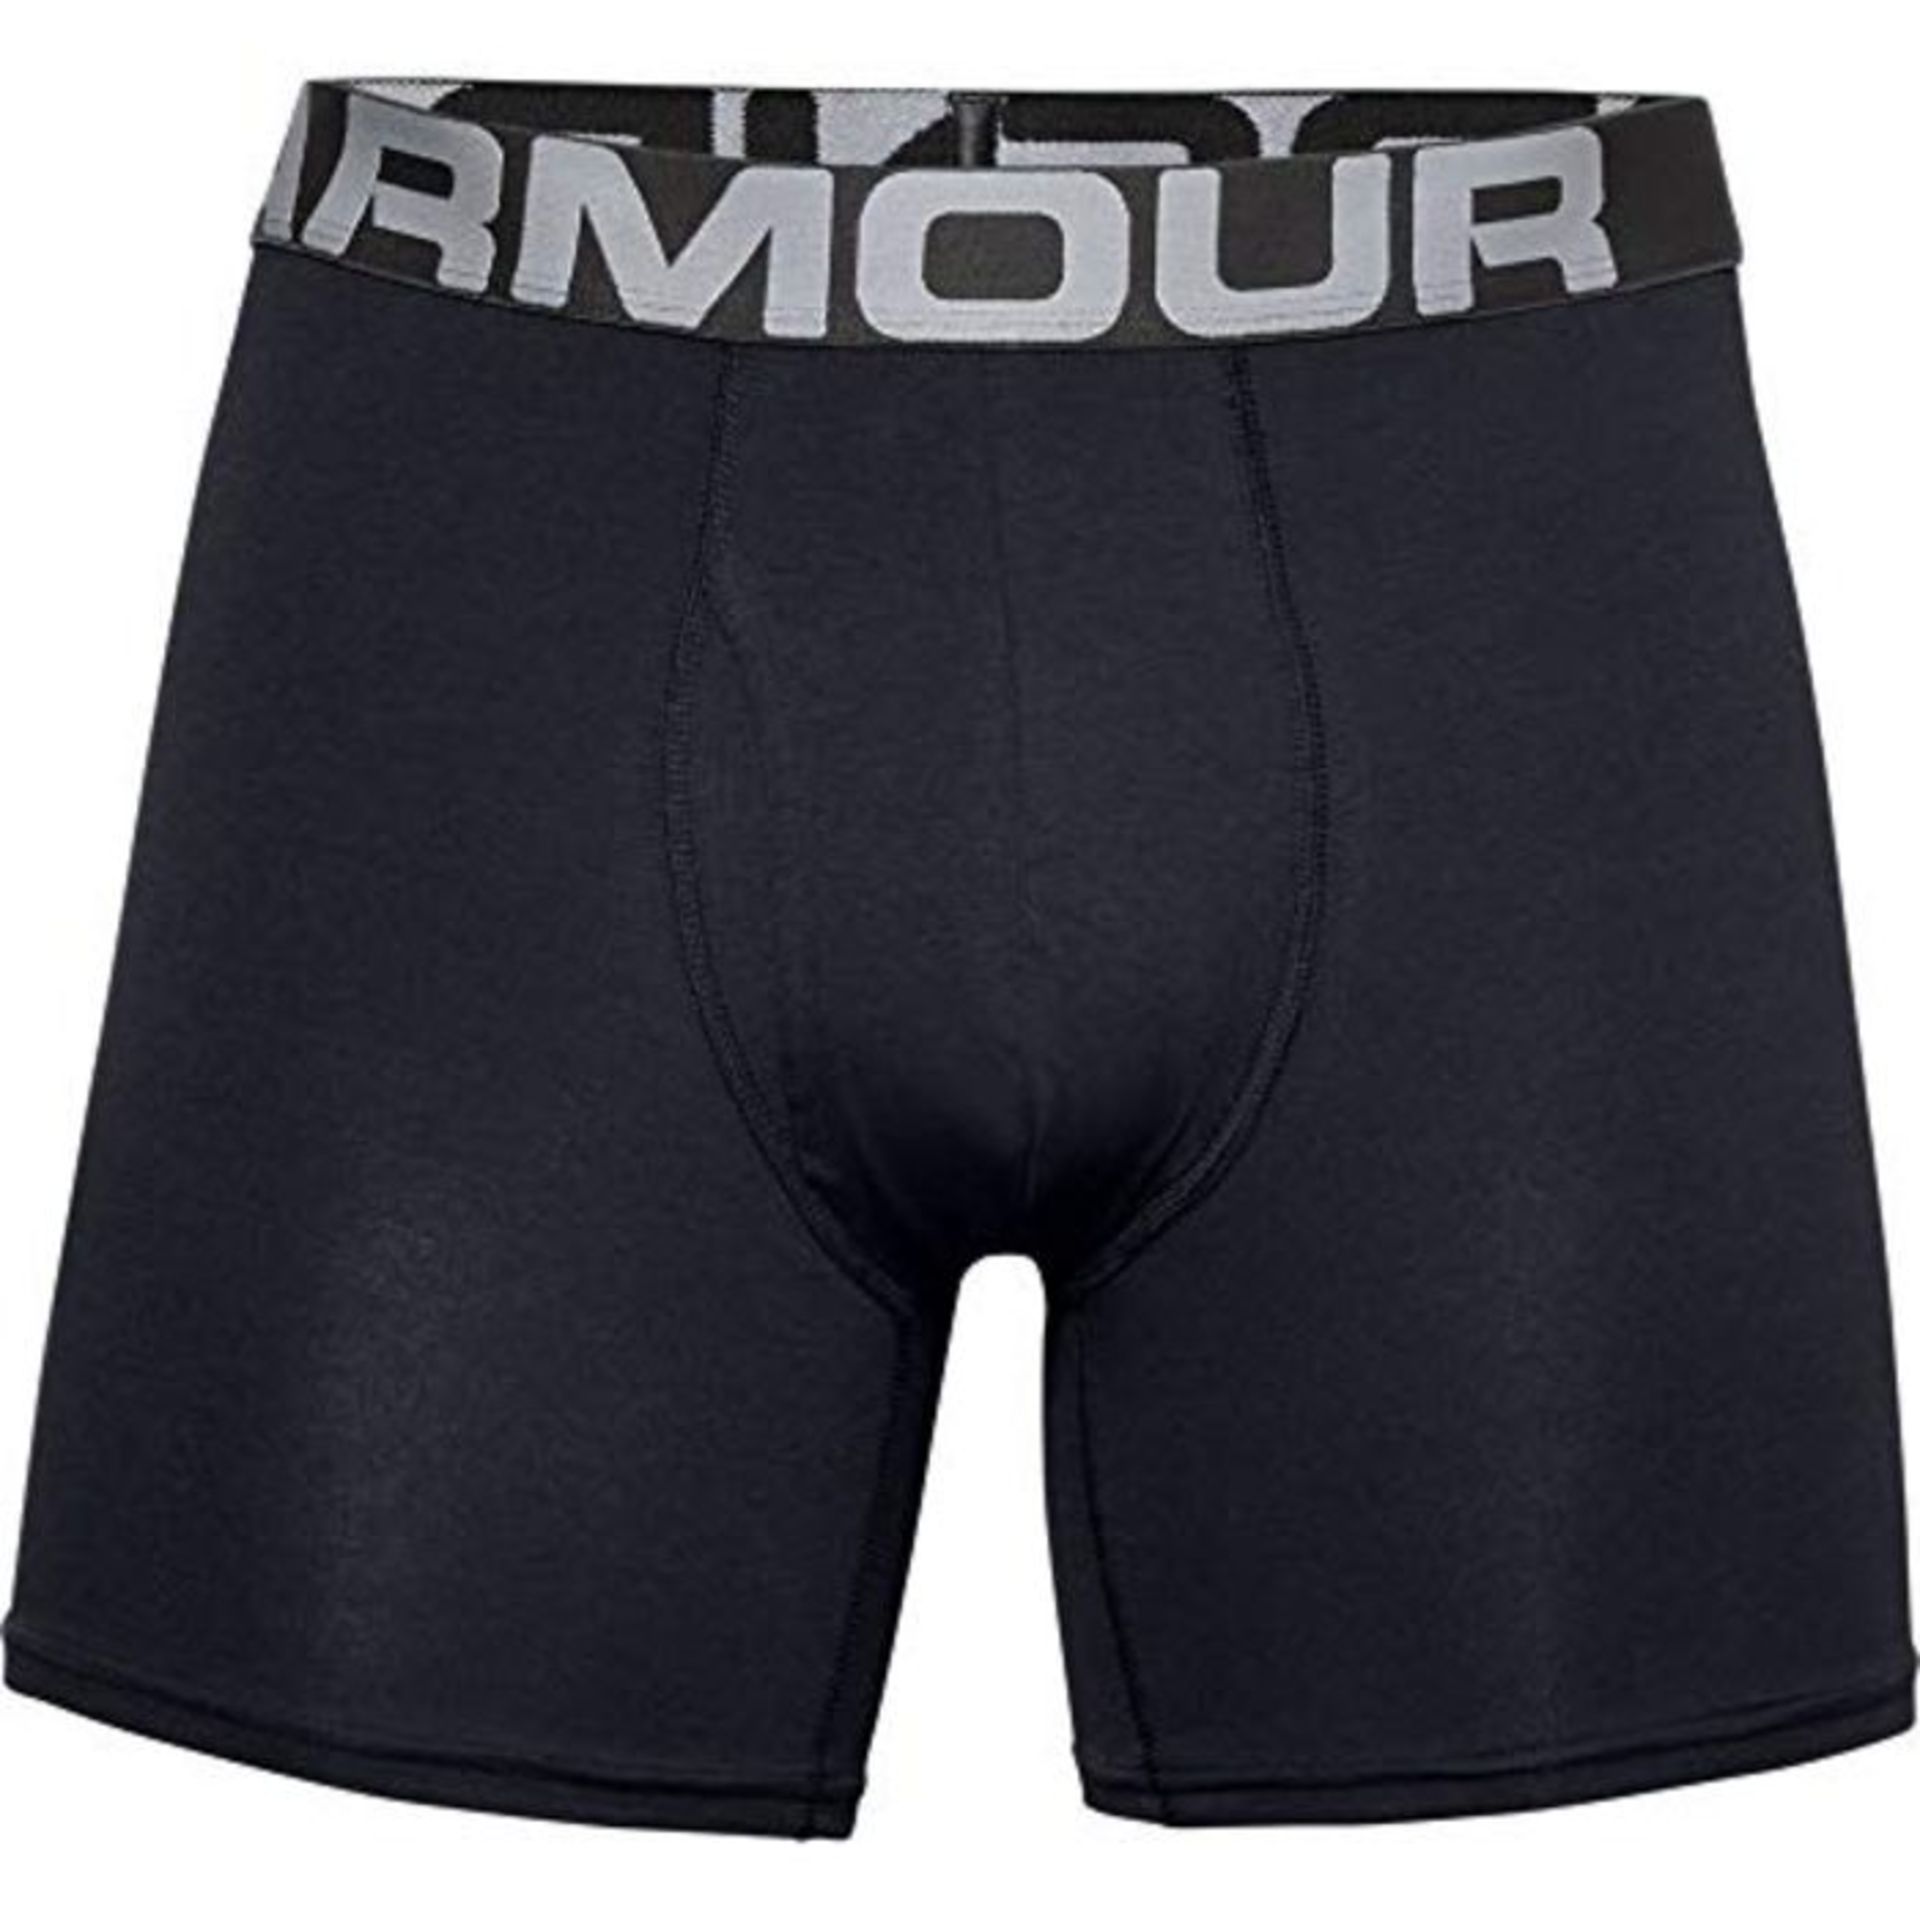 Elasticated and quick-drying sports underwear, extra-comfortable boxer briefs with 4-w